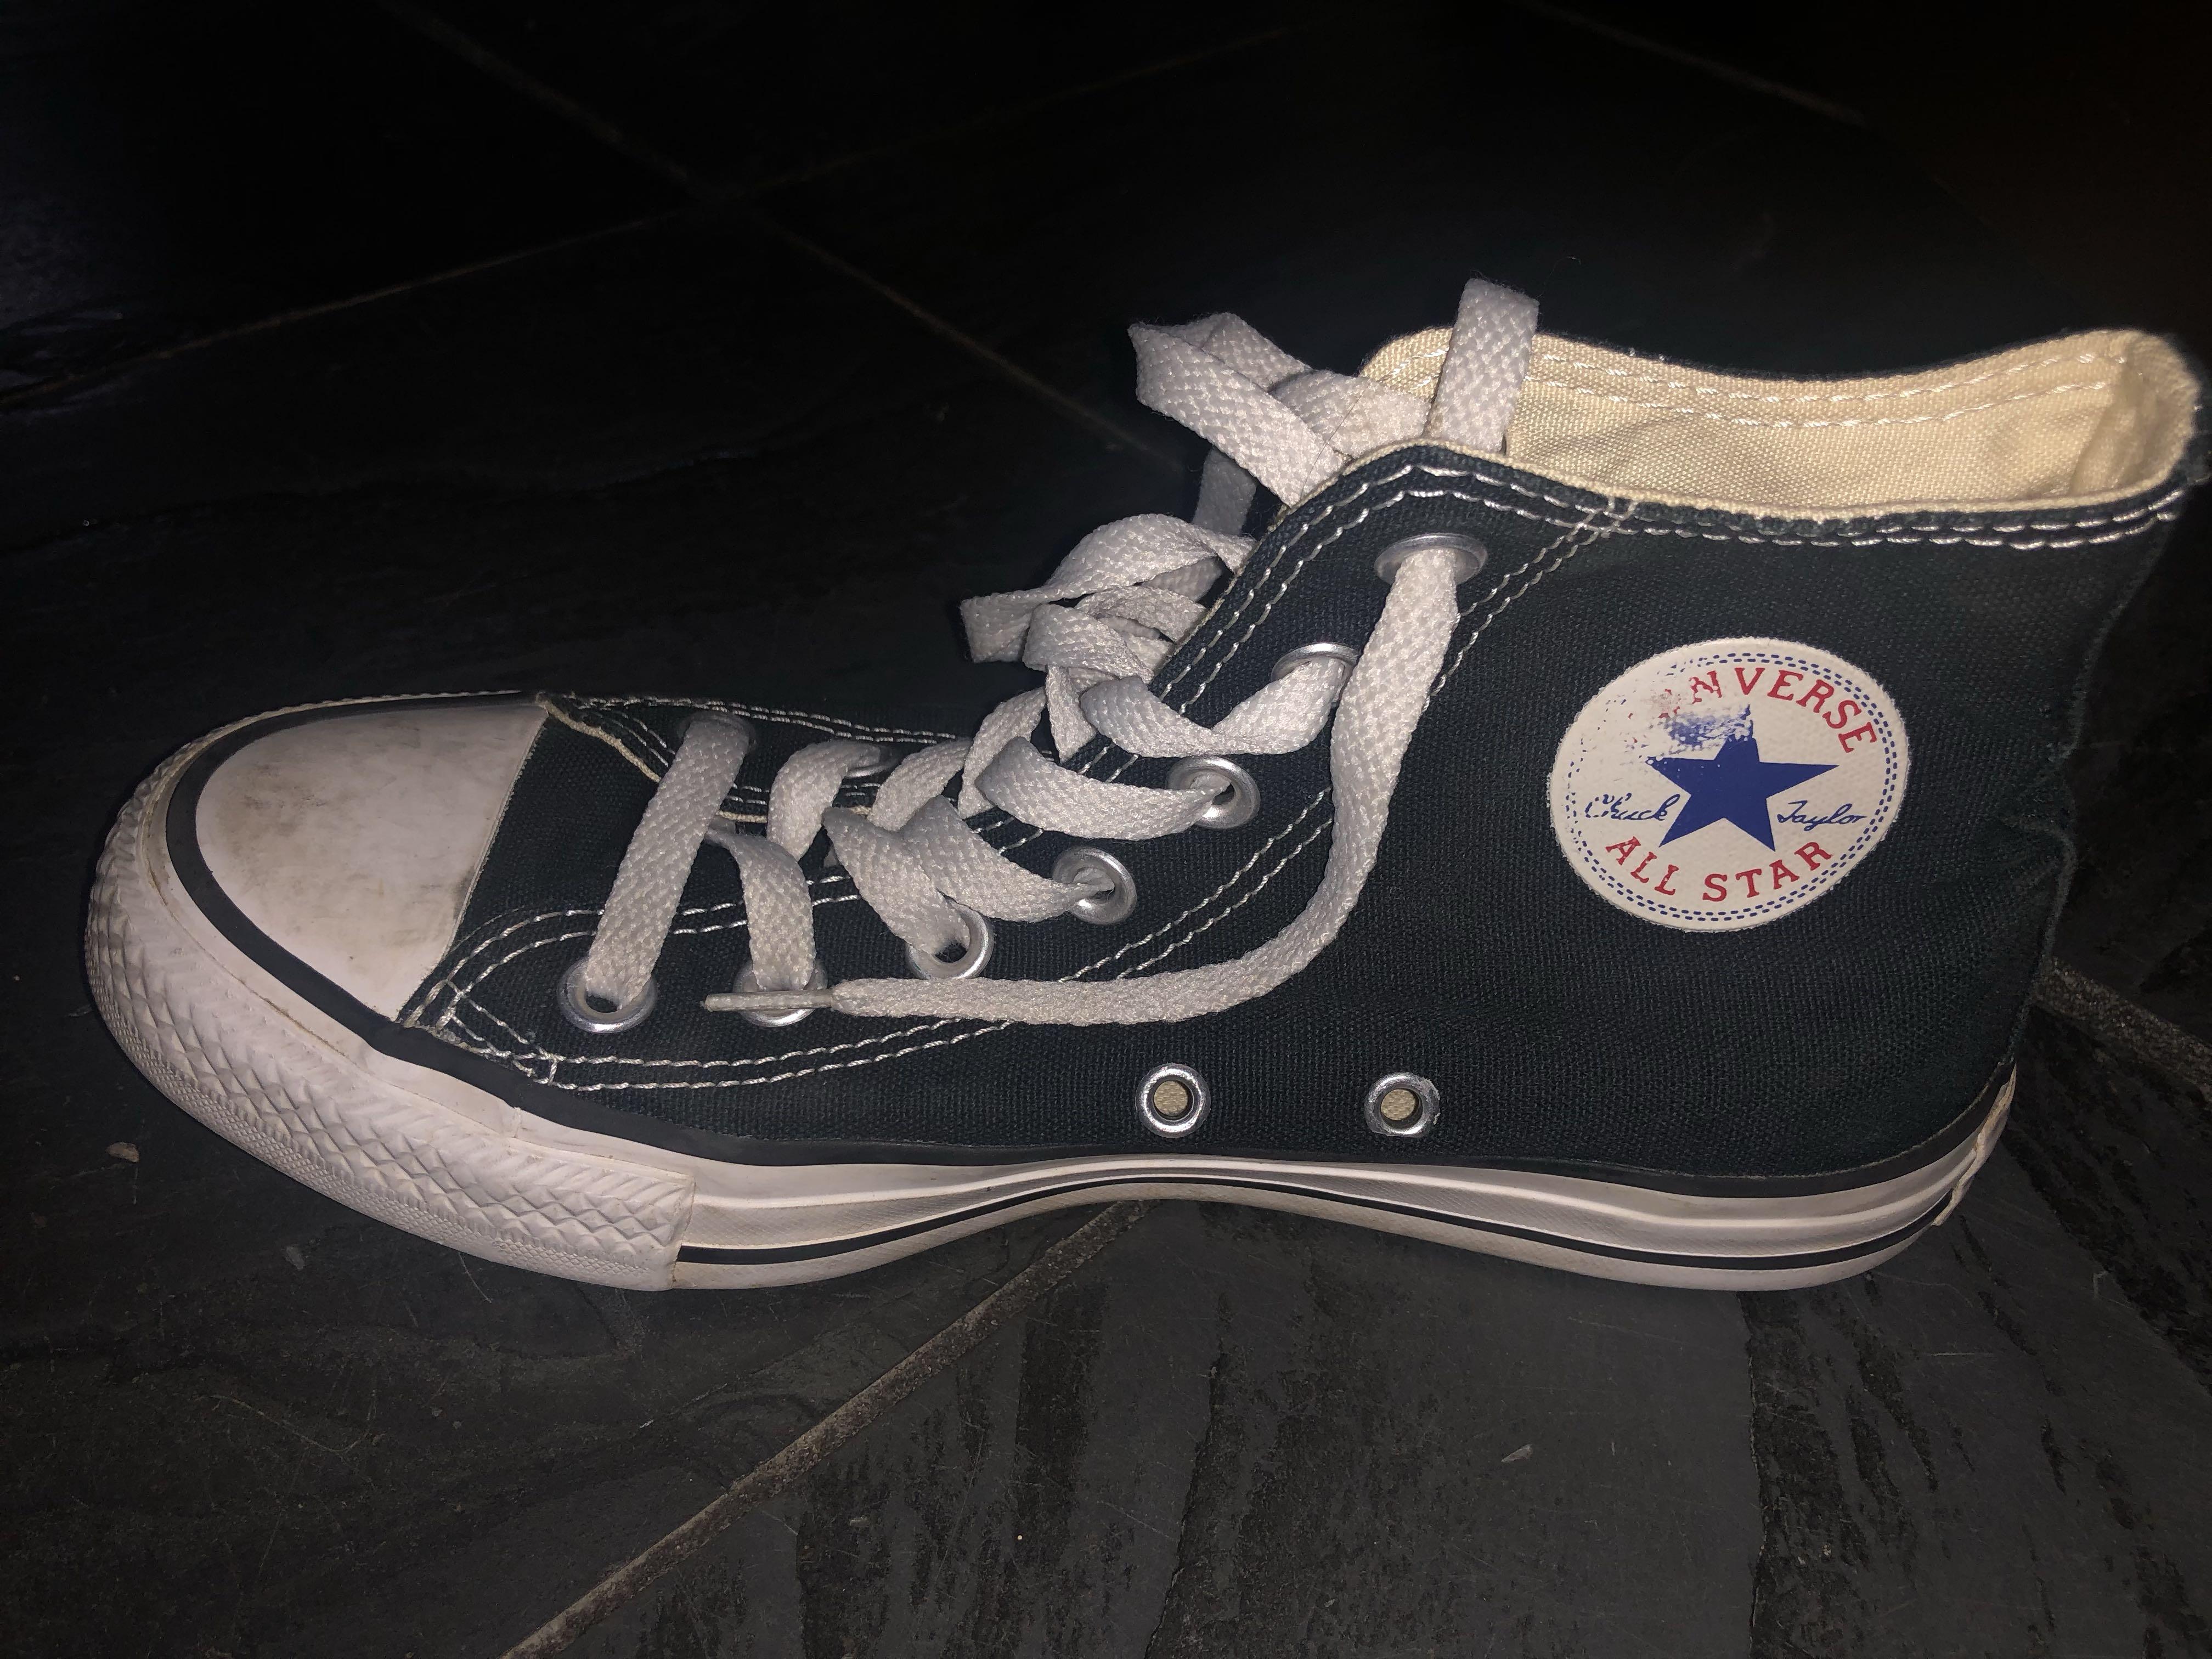 Converse Shoes - high cut EUR size 36.5, Men's Fashion, Footwear, Sneakers  on Carousell